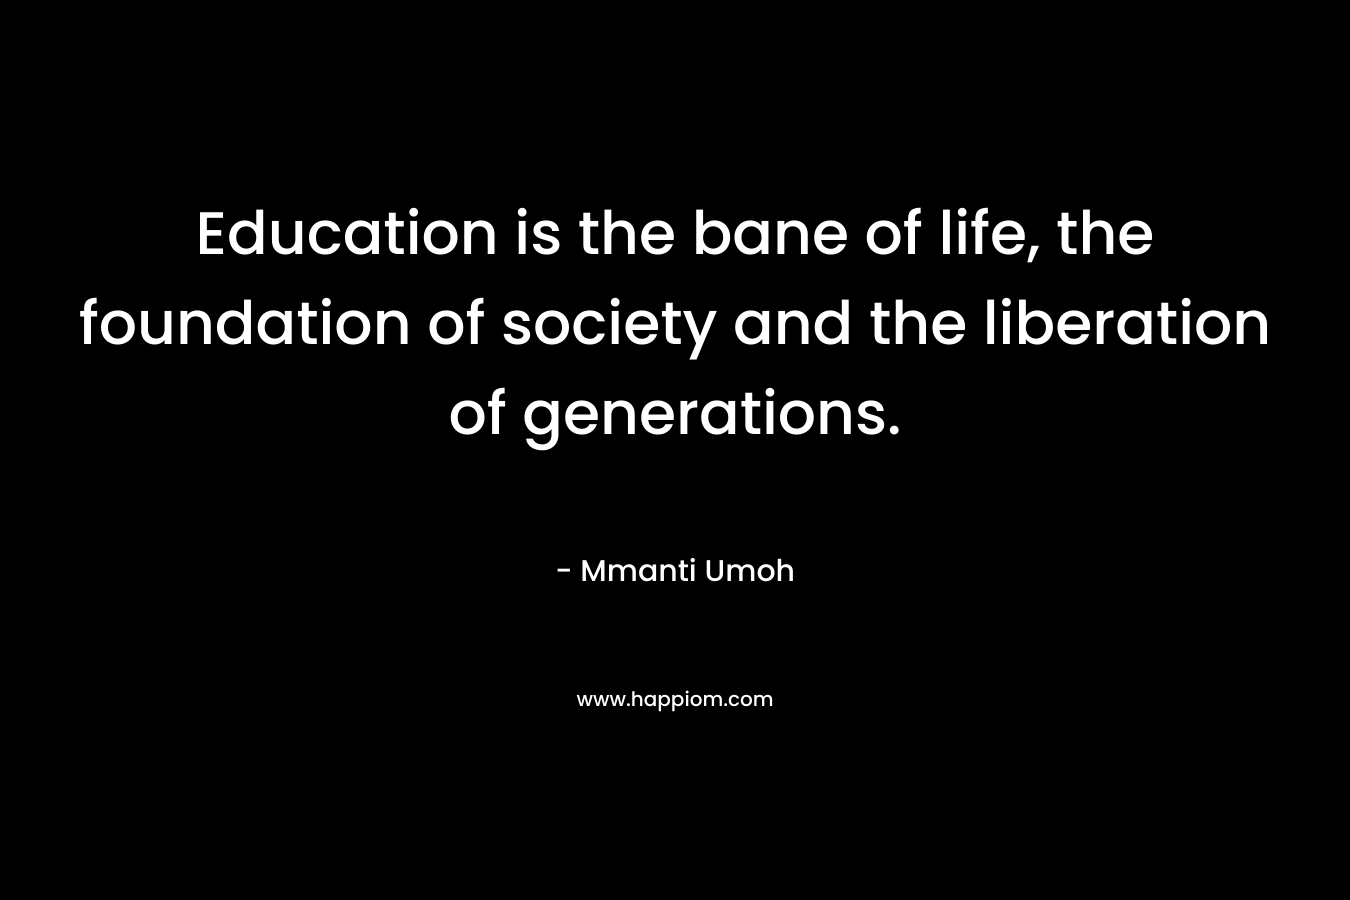 Education is the bane of life, the foundation of society and the liberation of generations.